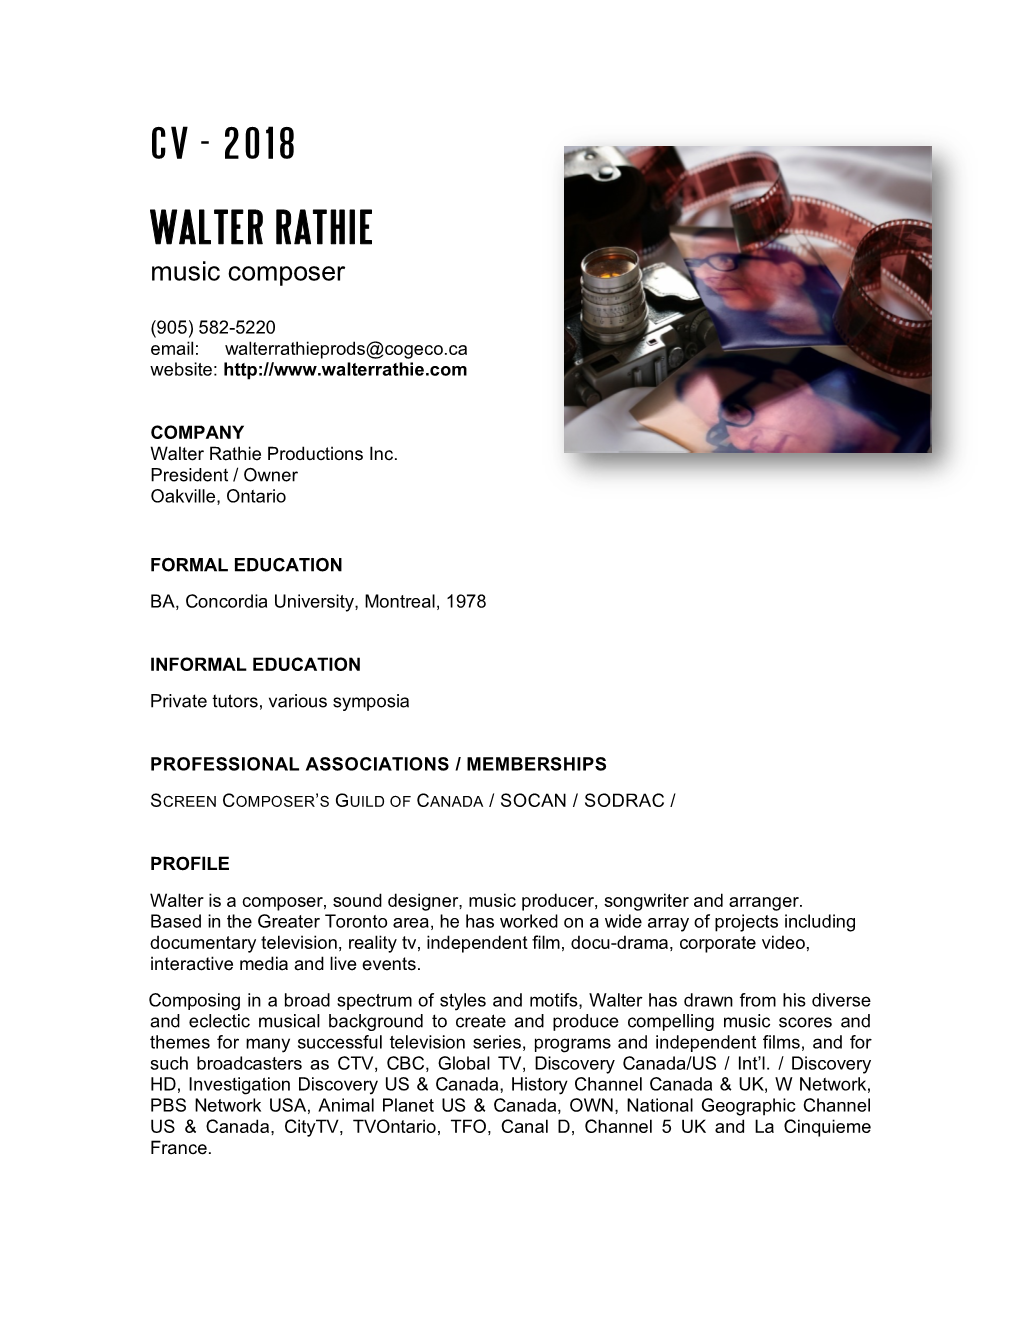 Walter Rathie Productions-Welcome to the Site